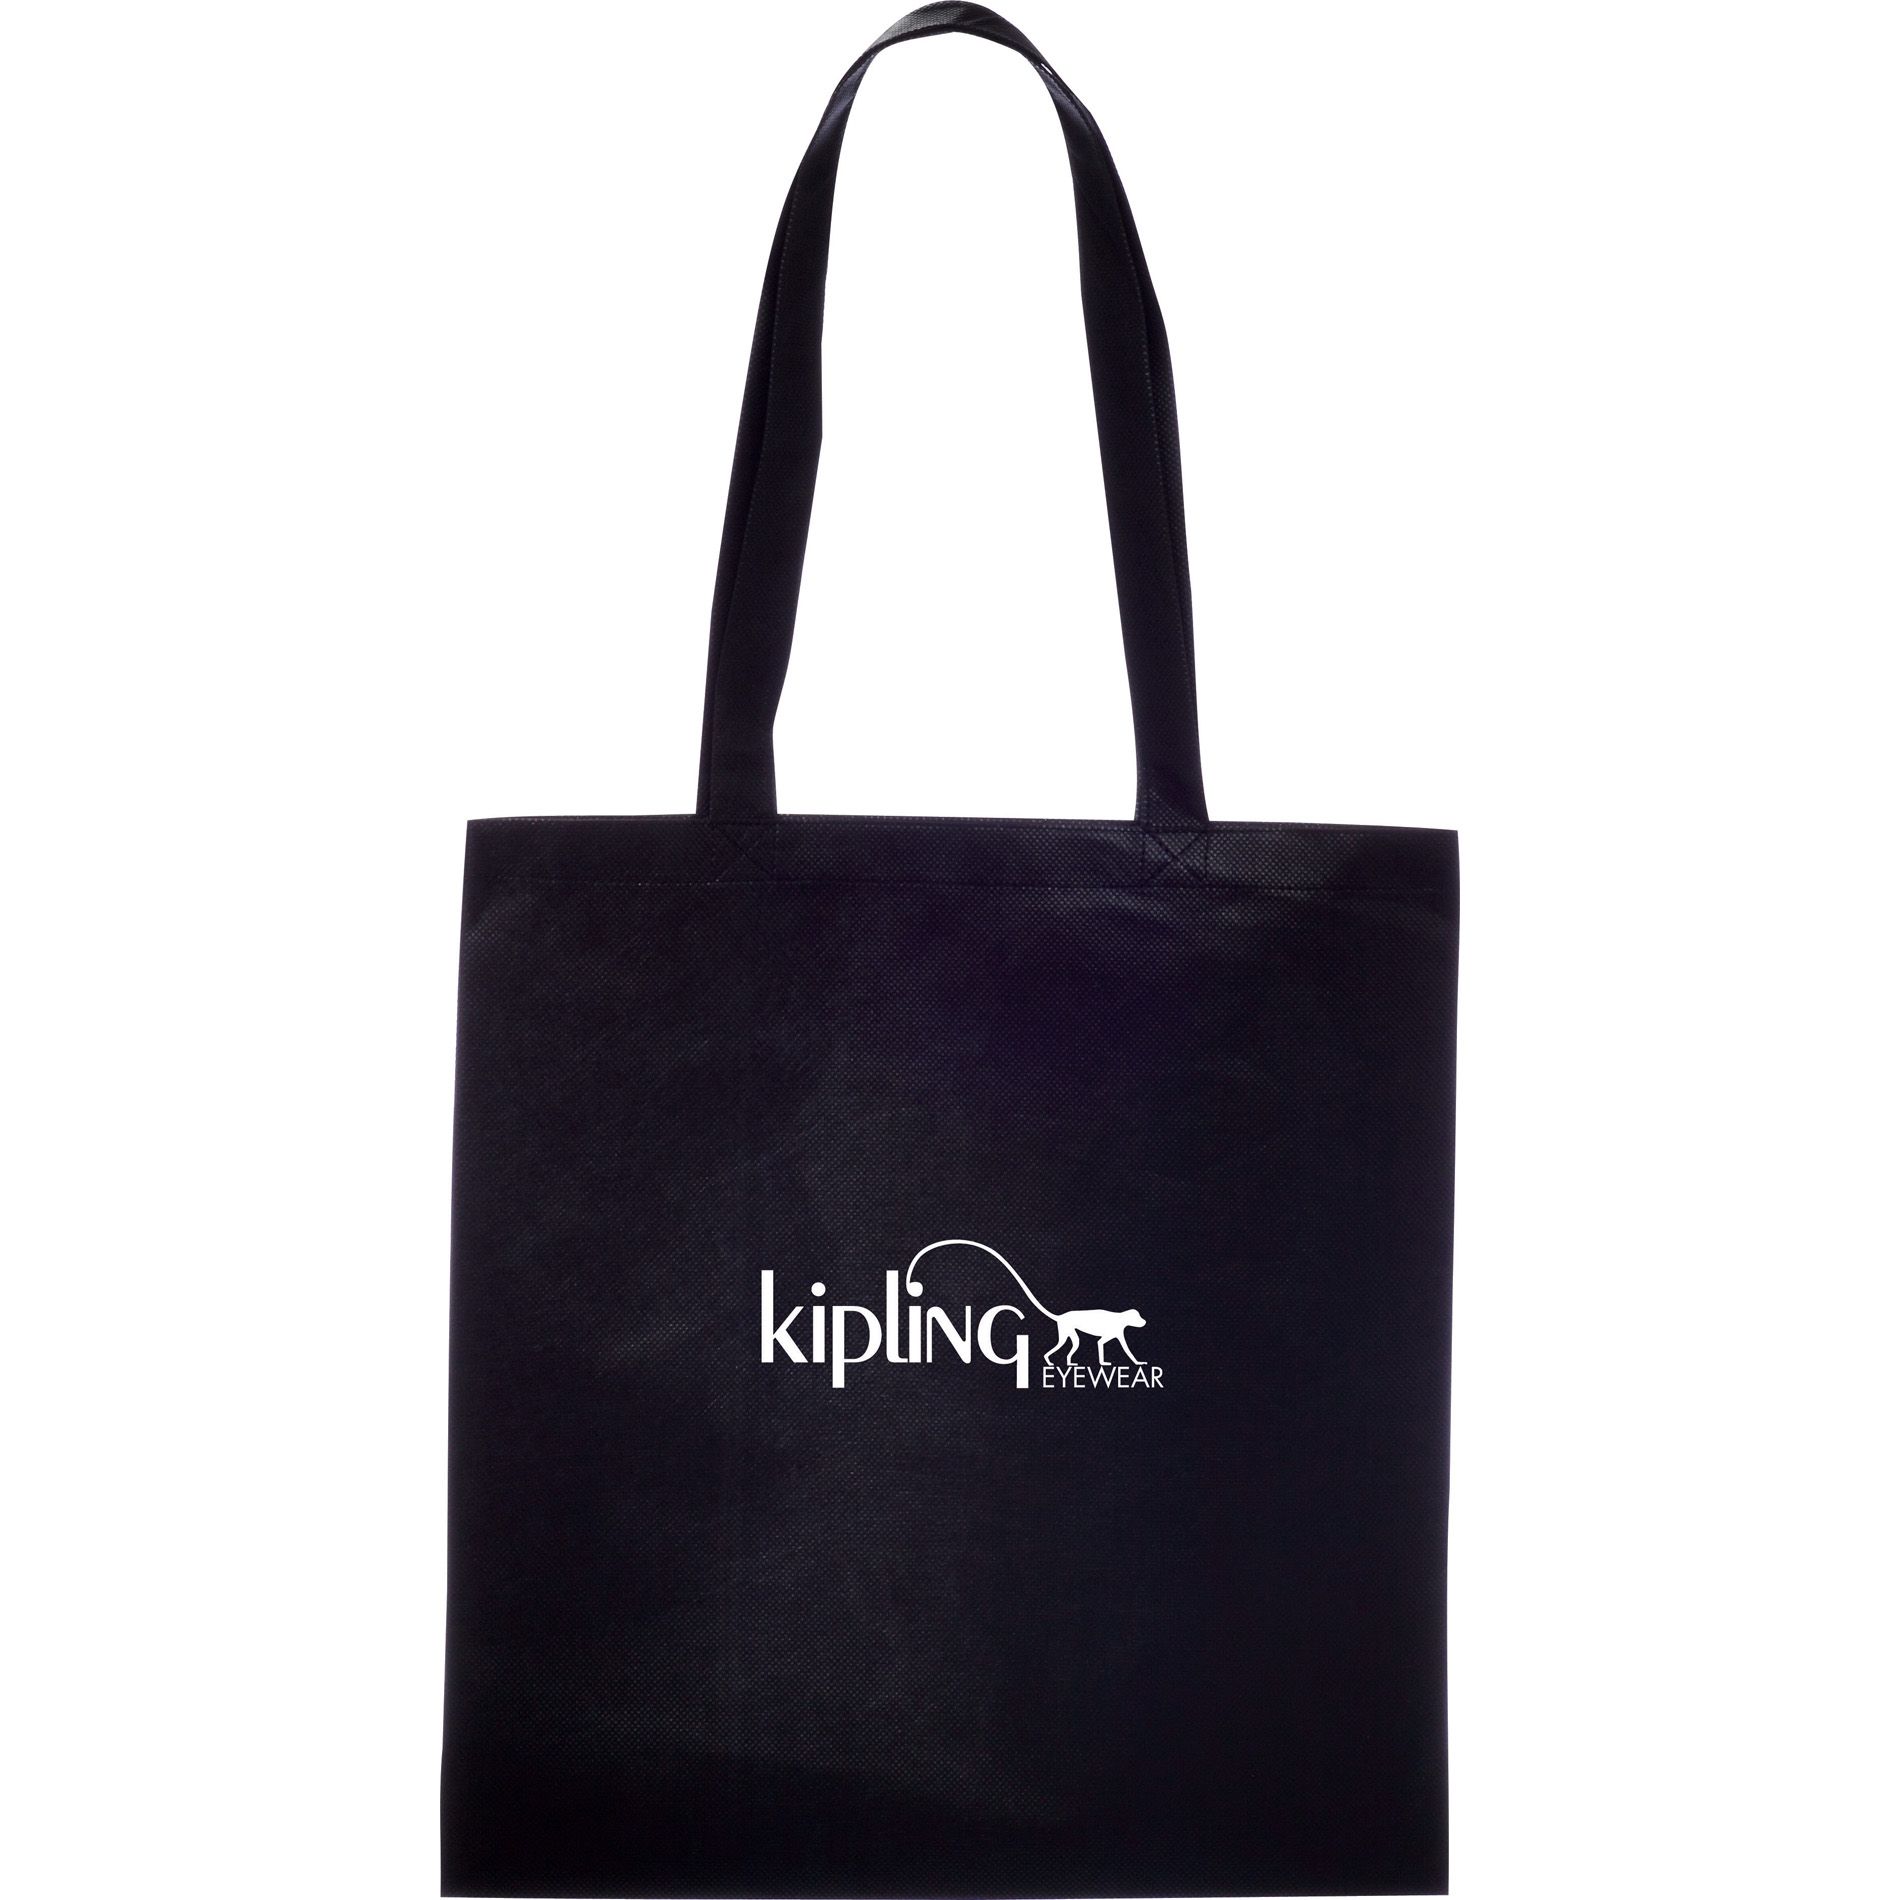 Bag - Non Woven Tote with Large Gusset